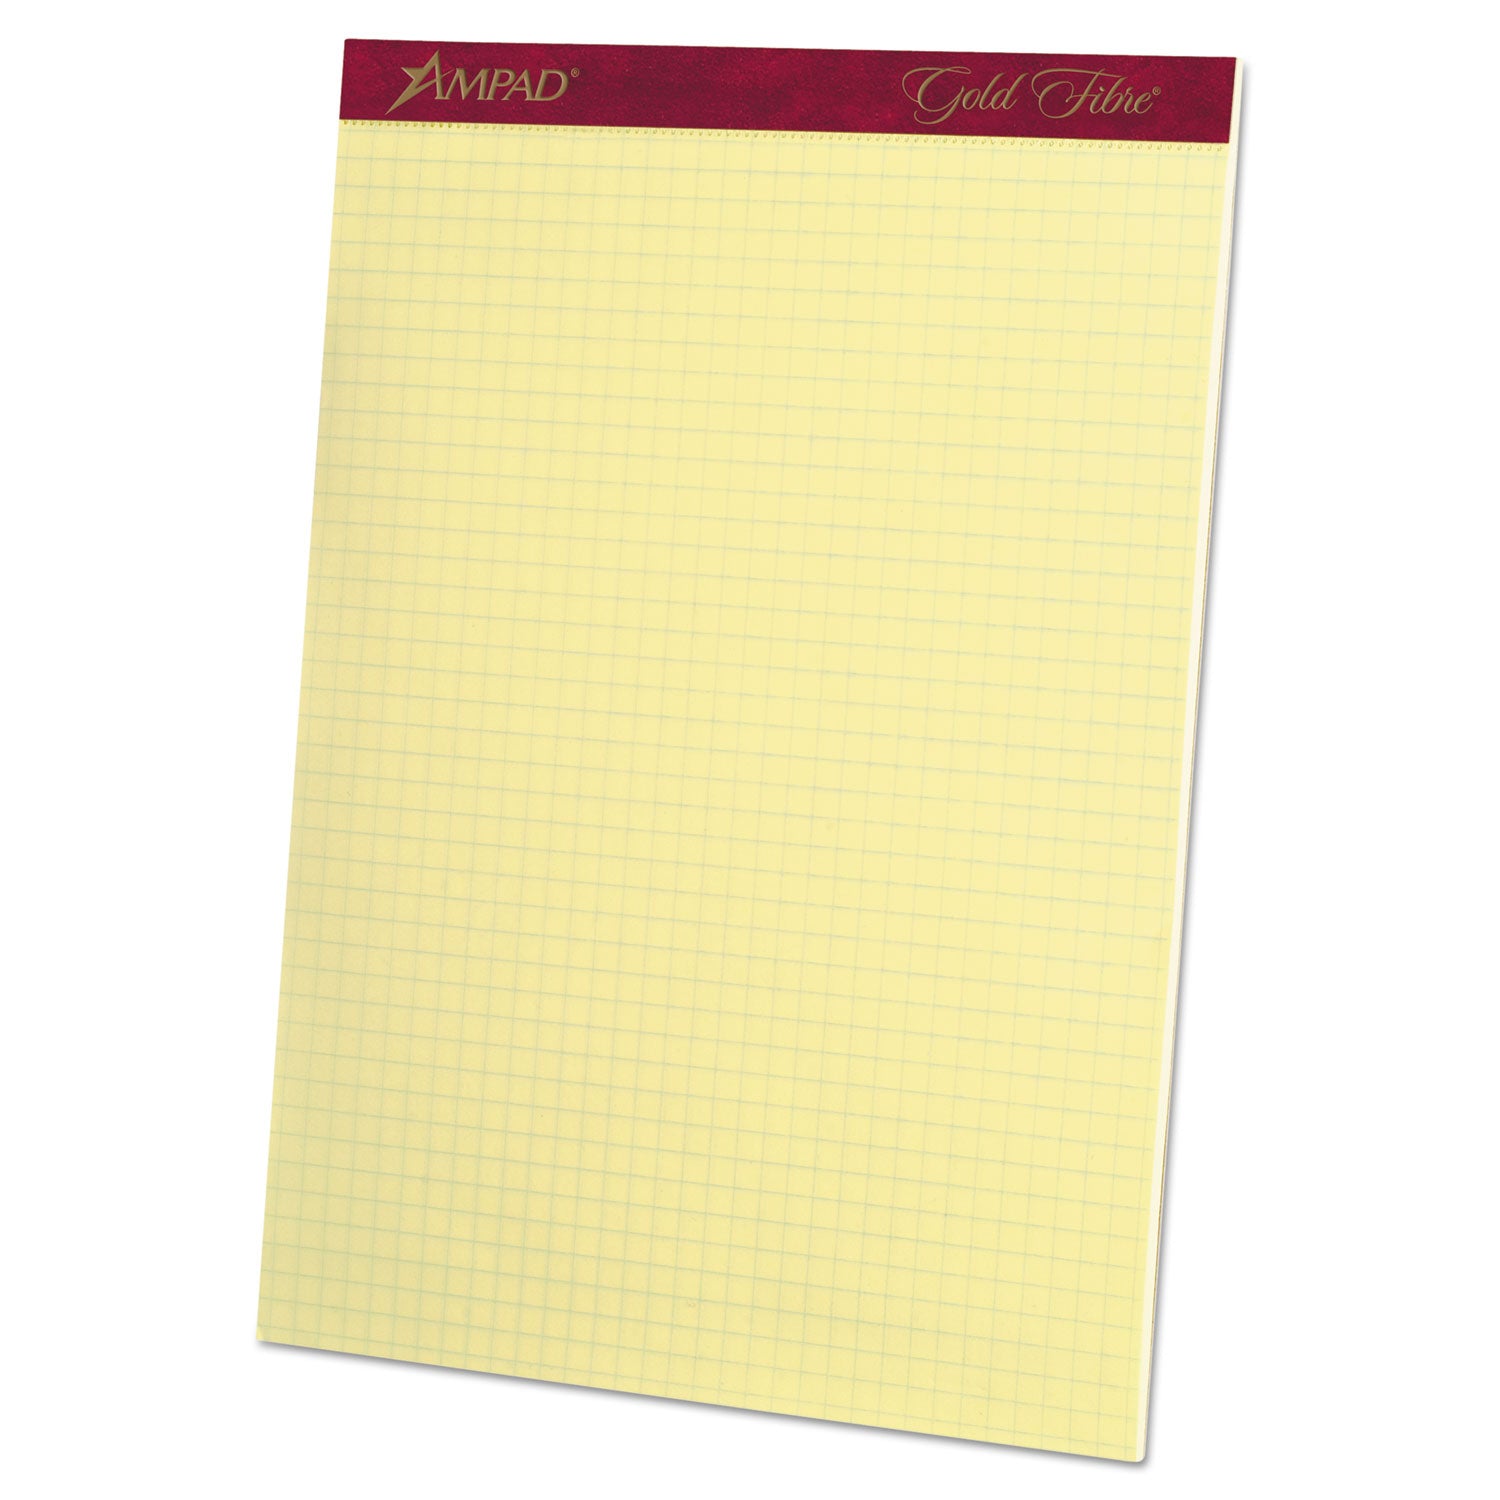 Gold Fibre Canary Quadrille Pads, Stapled with Perforated Sheets, Quadrille Rule (4 sq/in), 50 Canary 8.5 x 11.75 Sheets - 